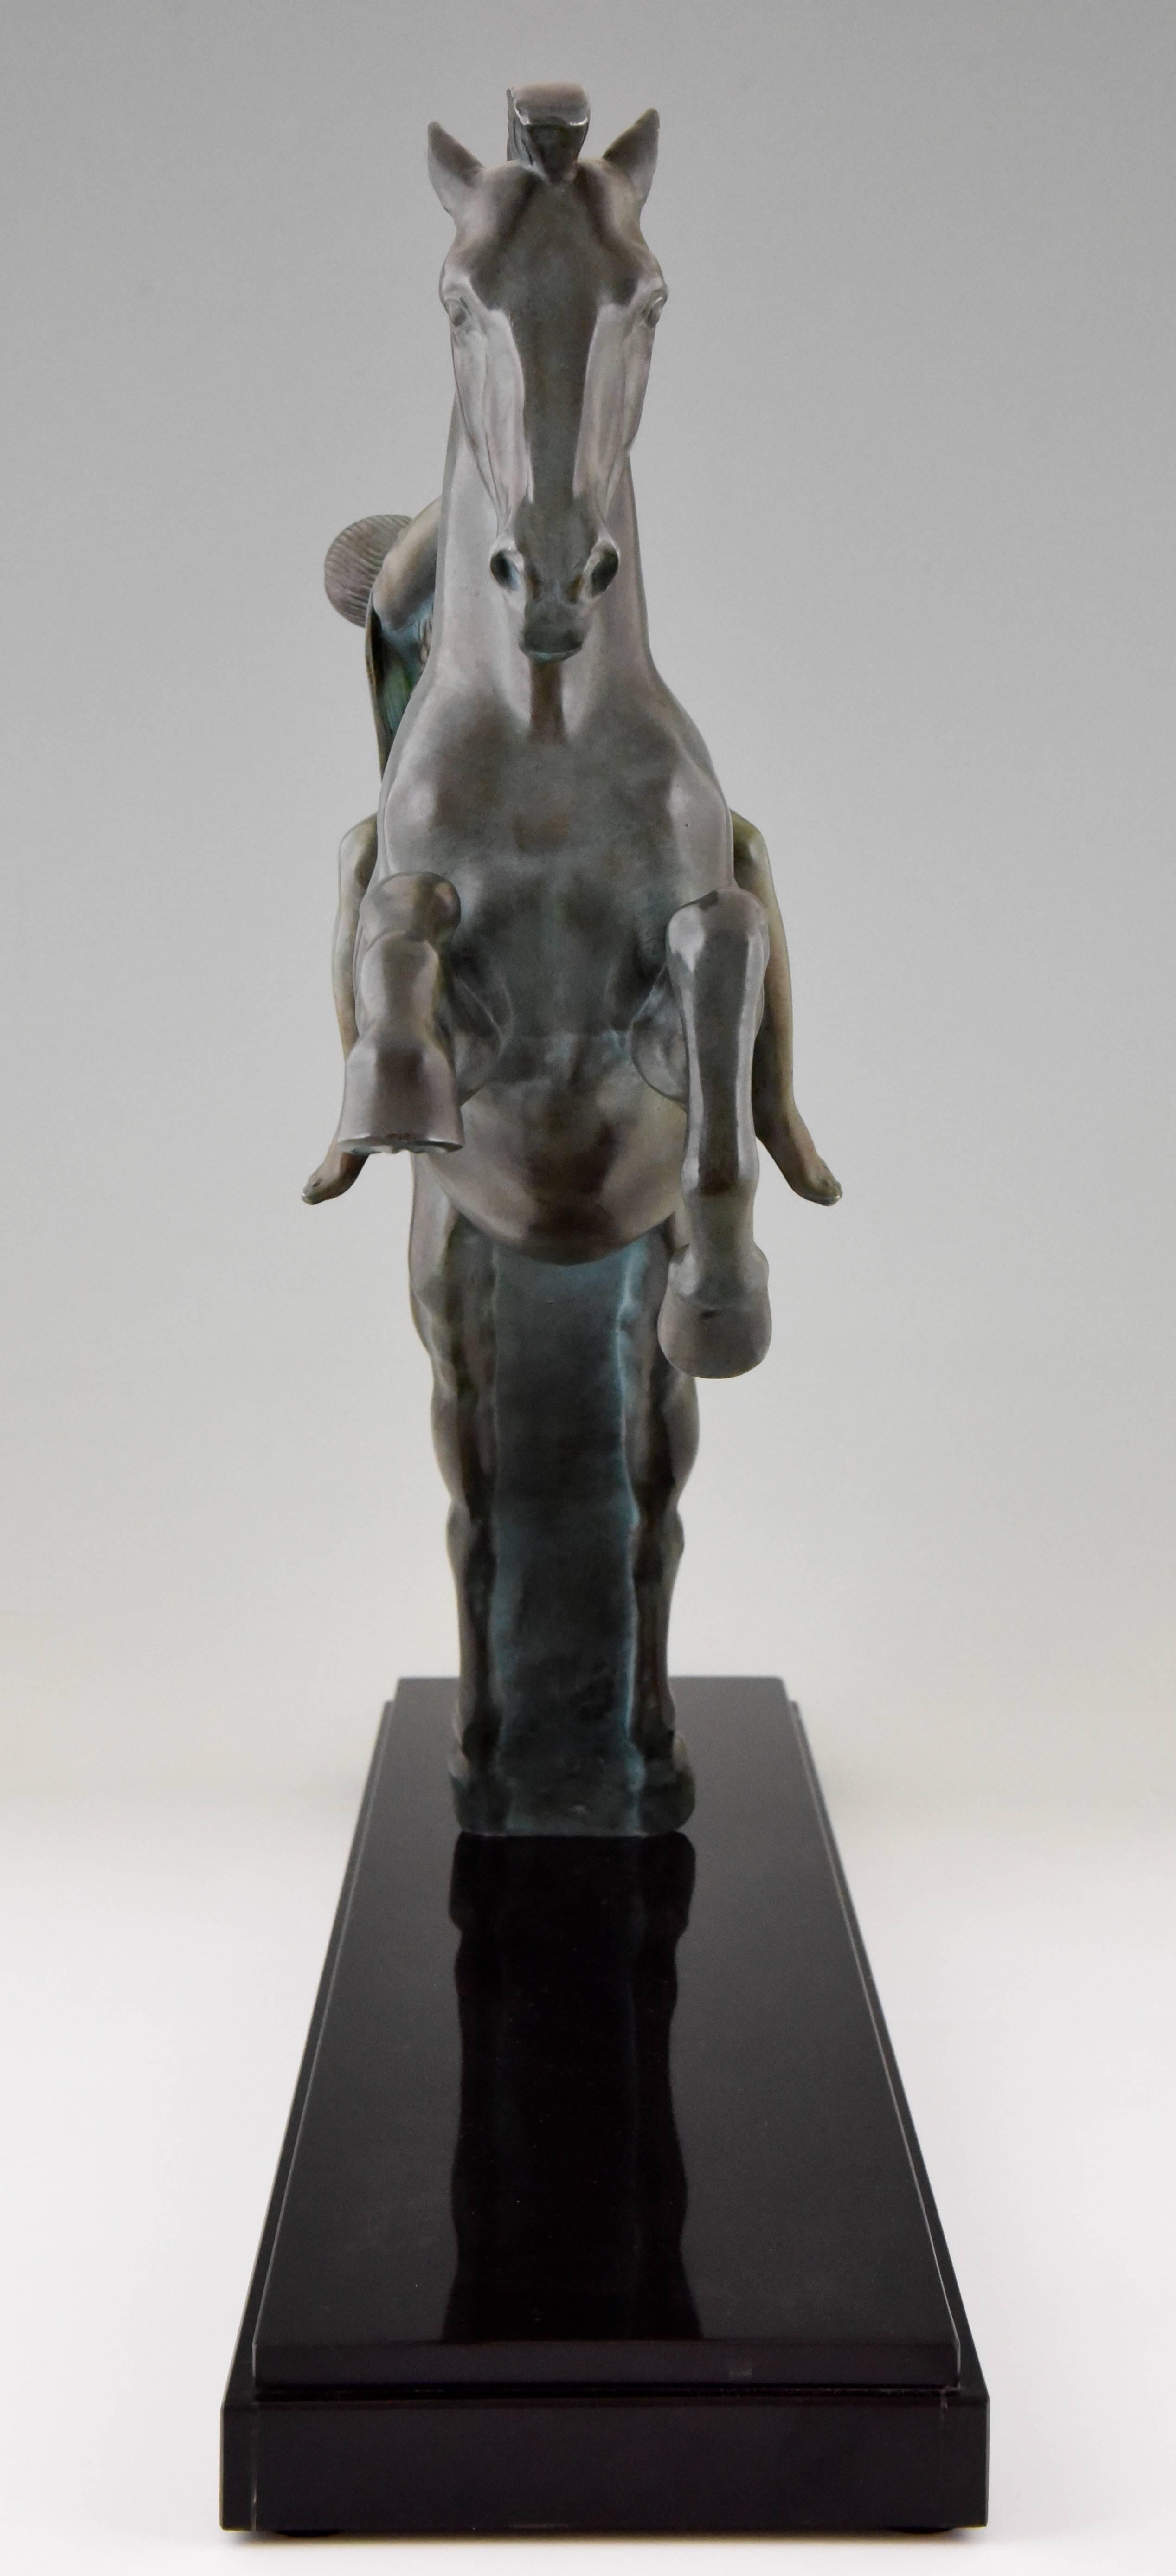 20th Century Art Deco Sculpture Female Nude on a Rearing Horse C. Charles for Max Le Verrier